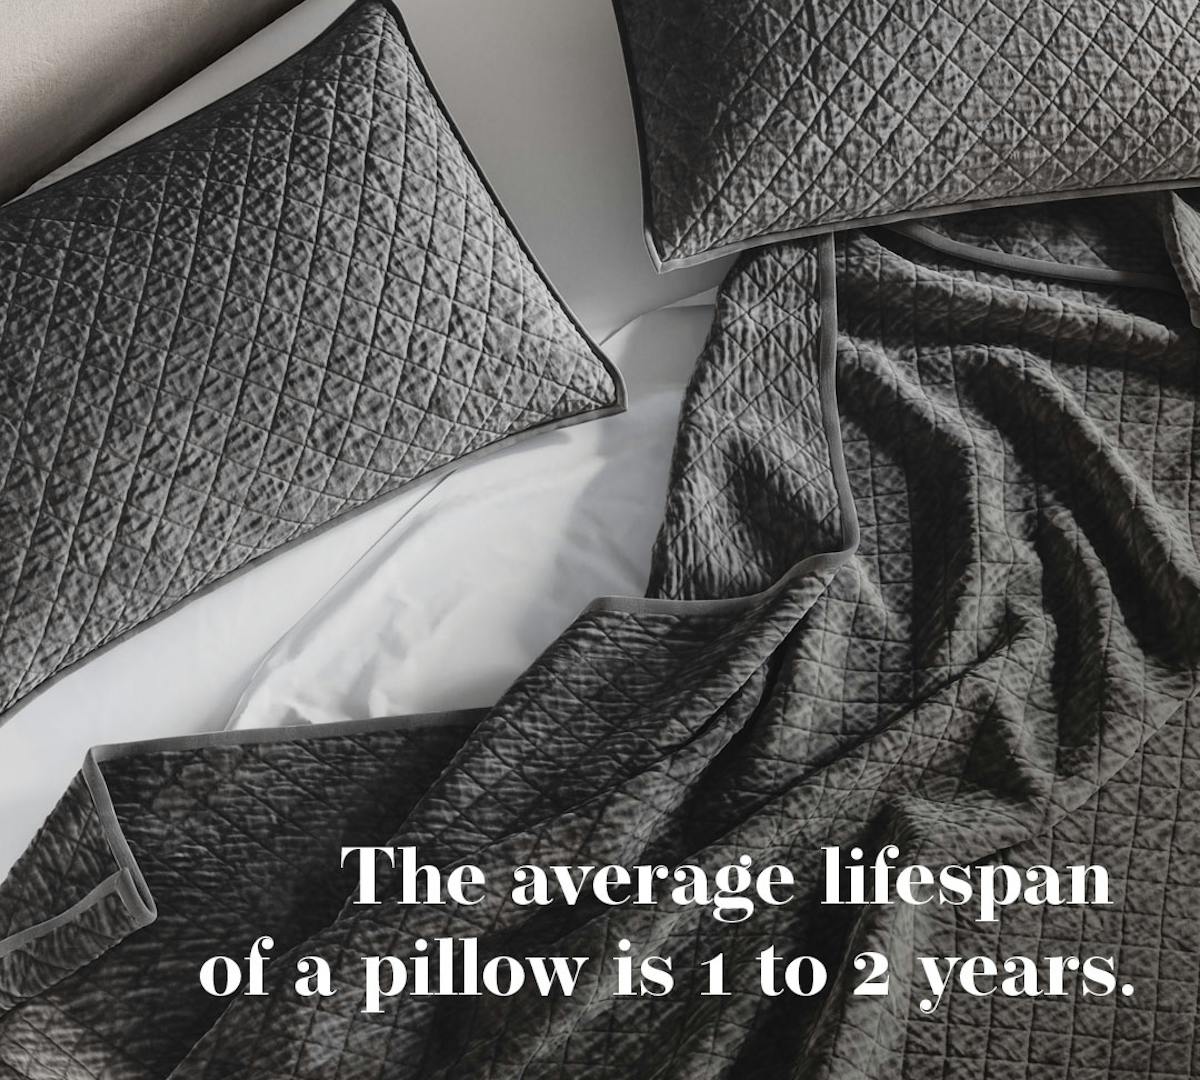 bed with pillows on top of it, stating the average lifespan of a pillow is 1-2 years